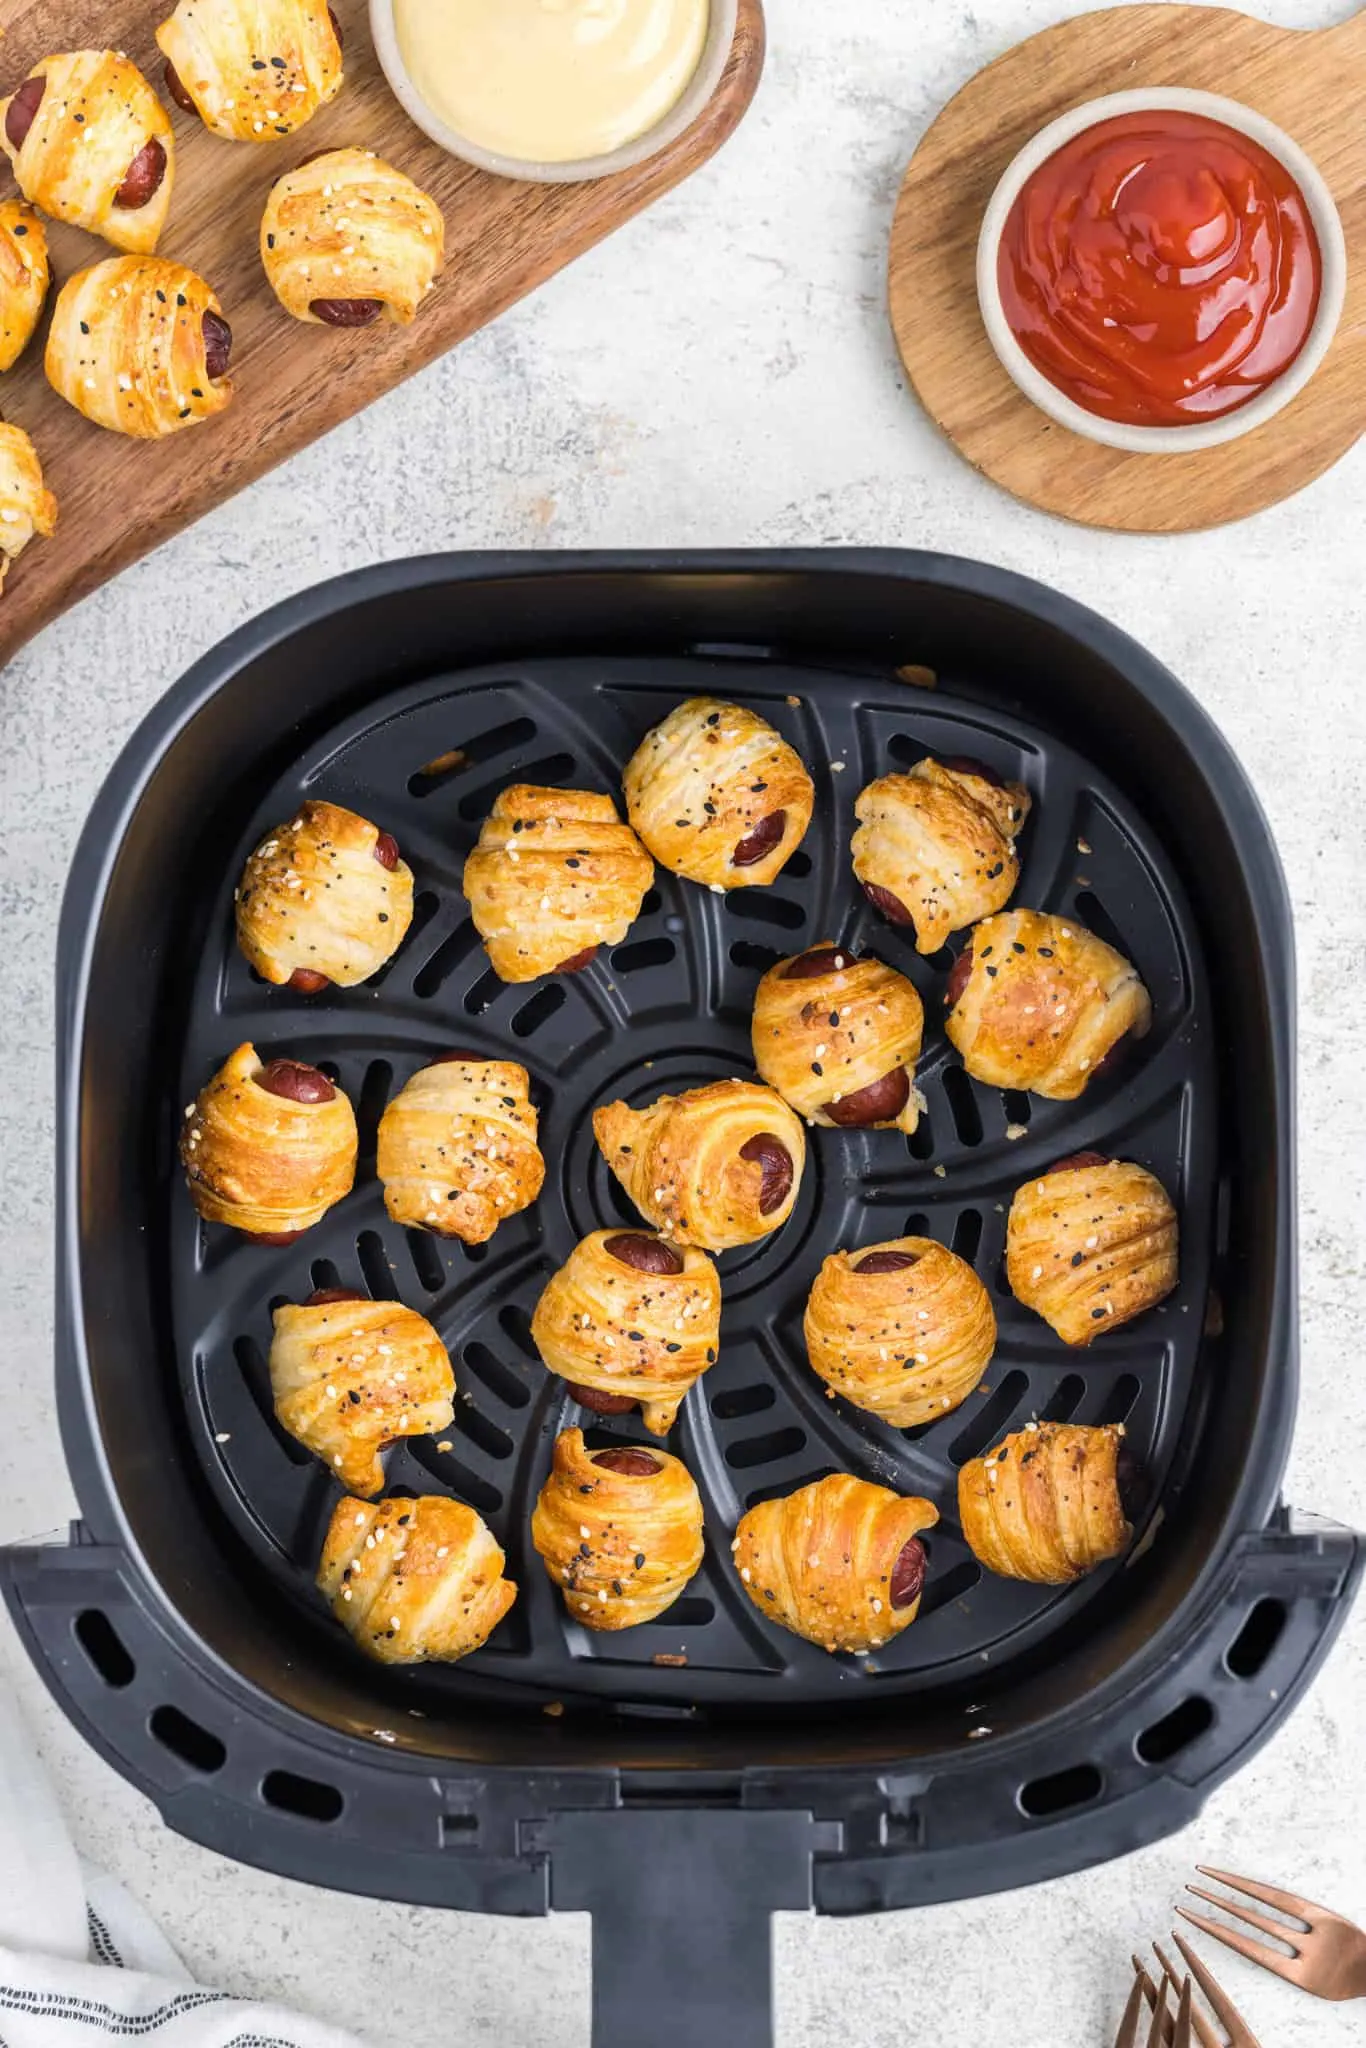 Air Fryer Pigs in a Blanket are the perfect party snack or kid friendly dinner using cocktail sausages, Pillsbury crescent dough and everything bagel seasoning.